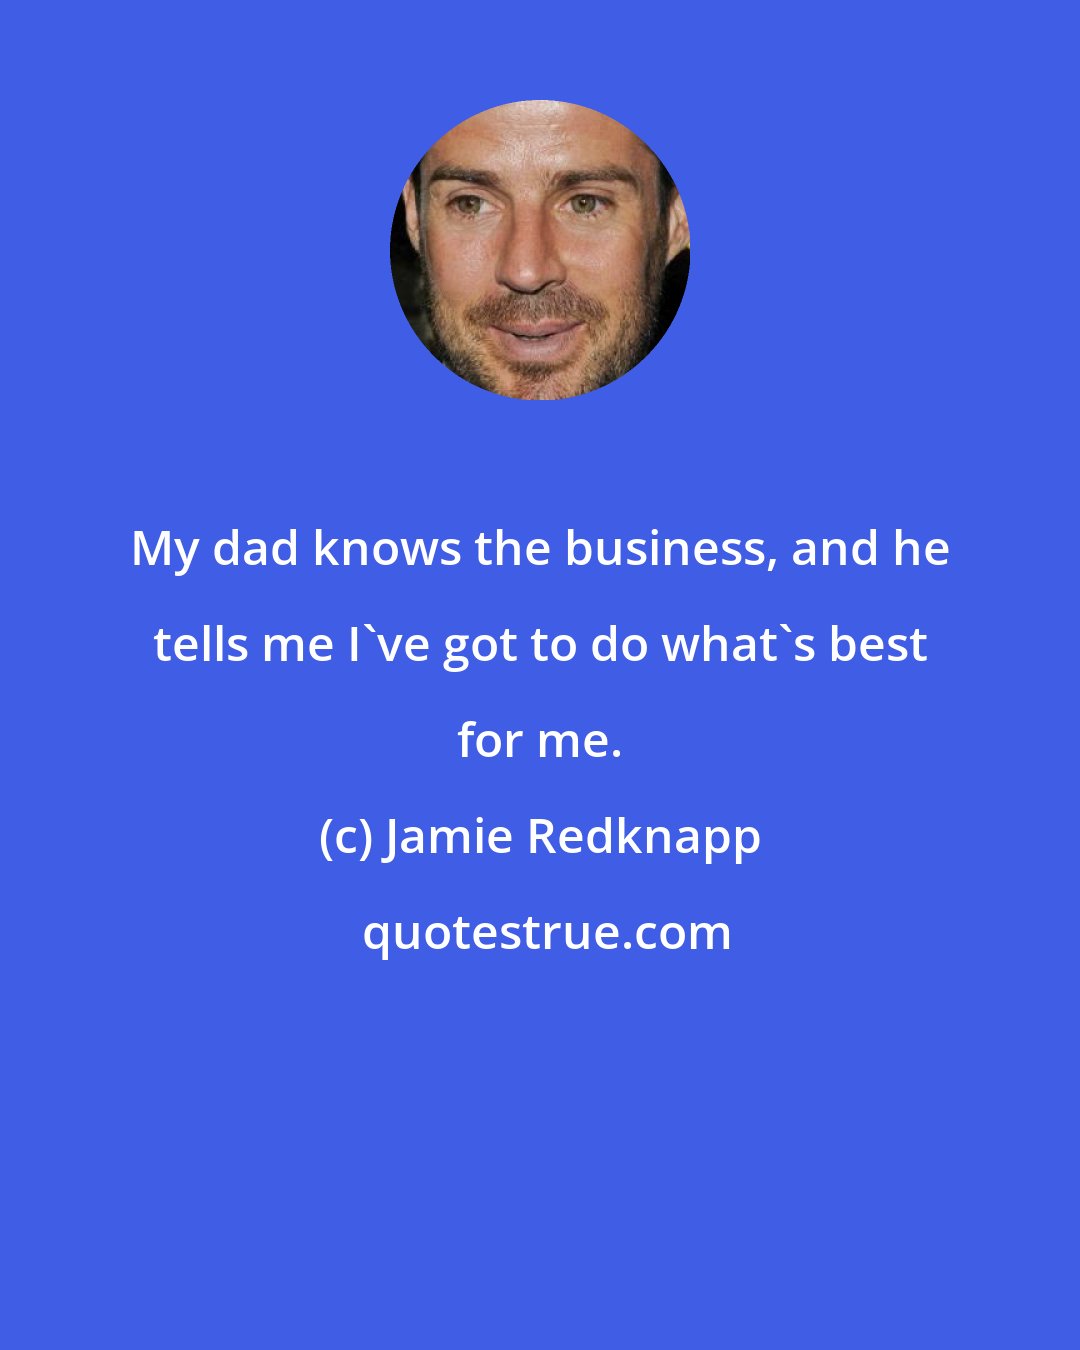 Jamie Redknapp: My dad knows the business, and he tells me I've got to do what's best for me.